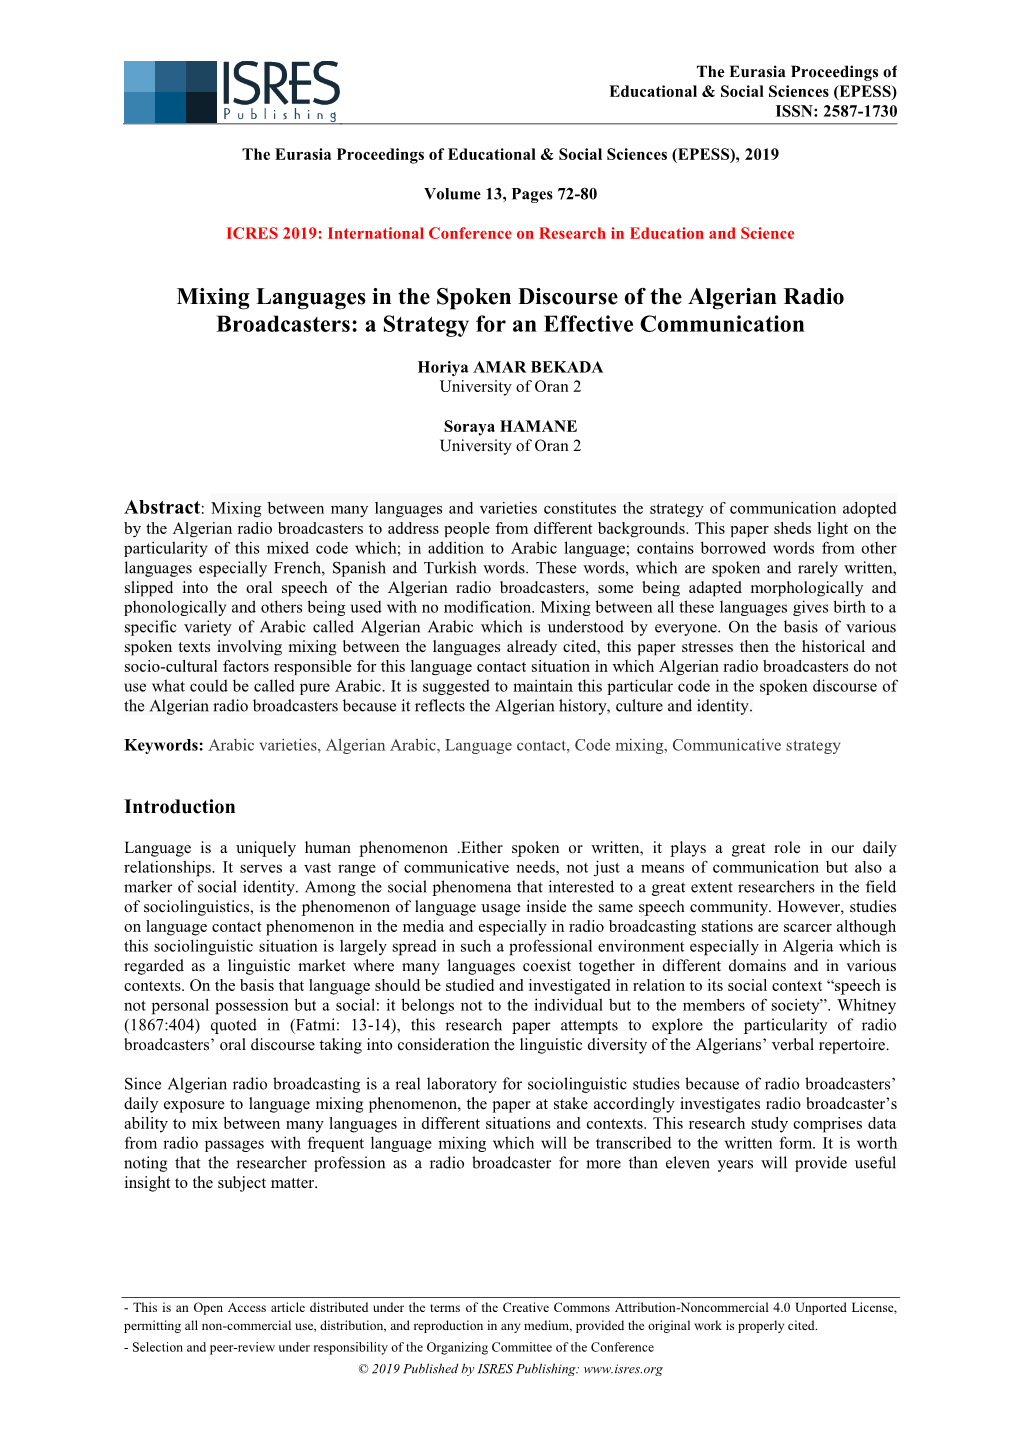 Mixing Languages in the Spoken Discourse of the Algerian Radio Broadcasters: a Strategy for an Effective Communication